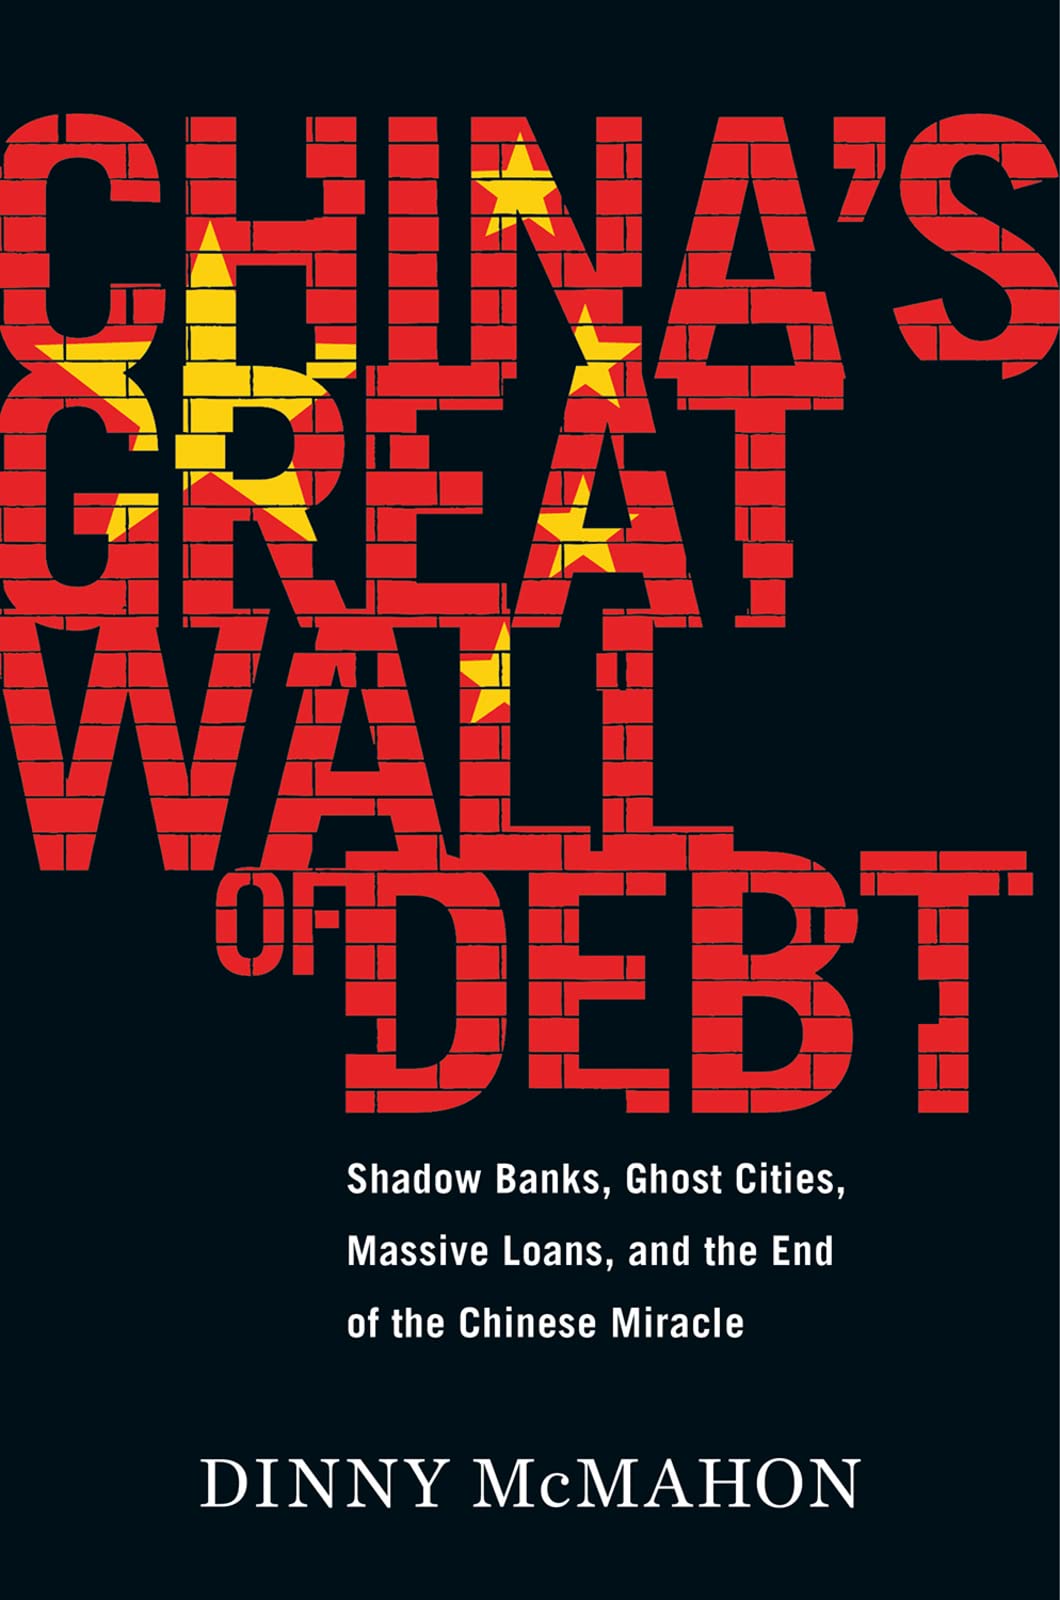 Book Cover China's Great Wall Of Debt: Shadow Banks, Ghost Cities, Massive Loans, and the End of the Chinese Miracle